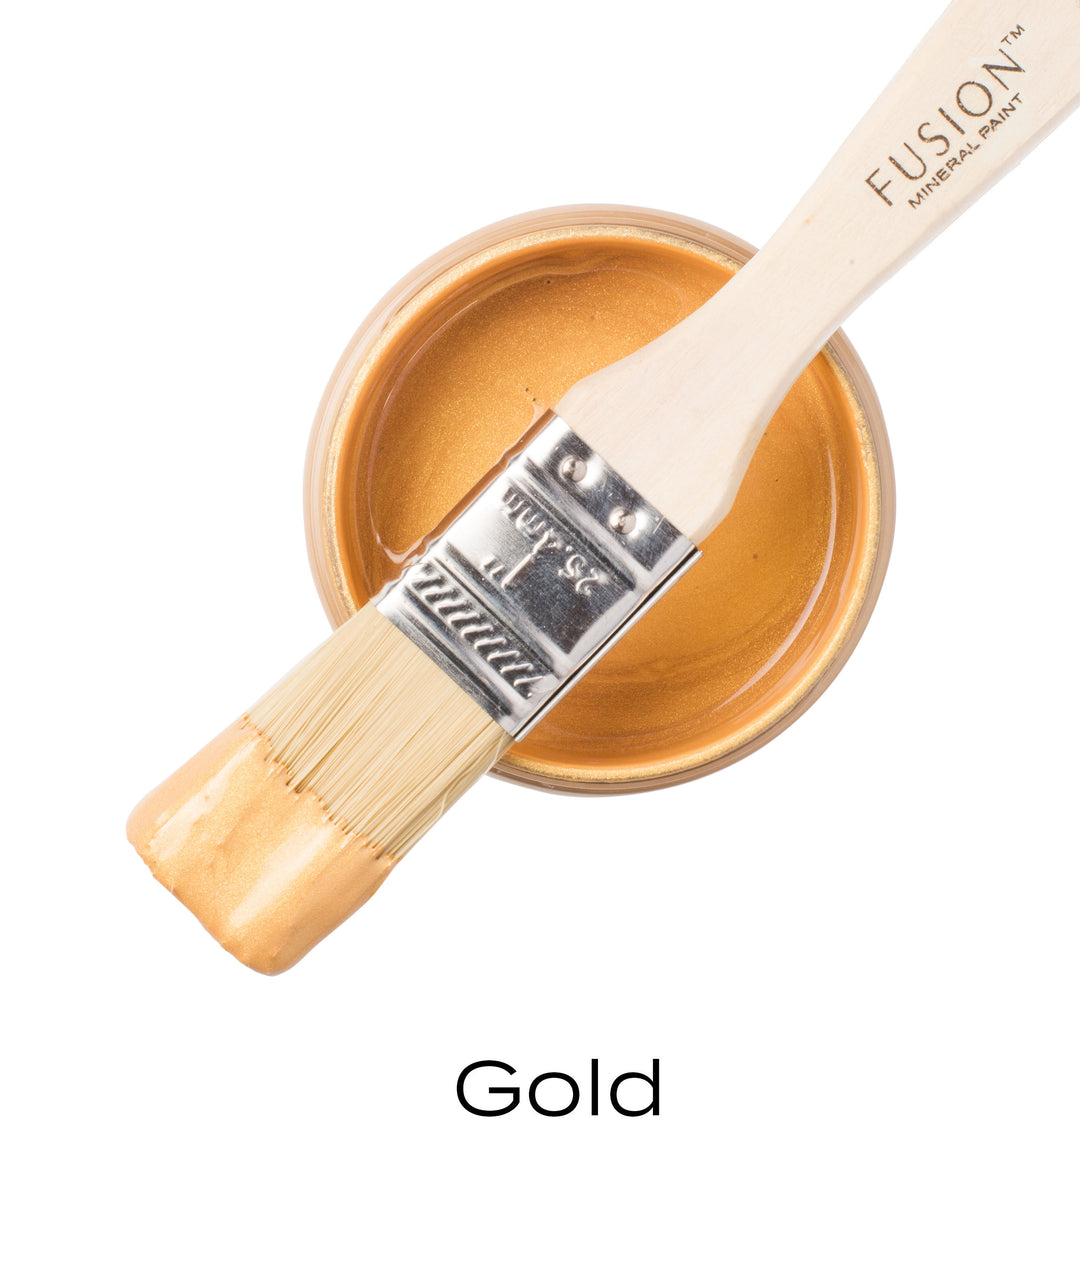 Fusion Mineral Paint Metallics - GOLD